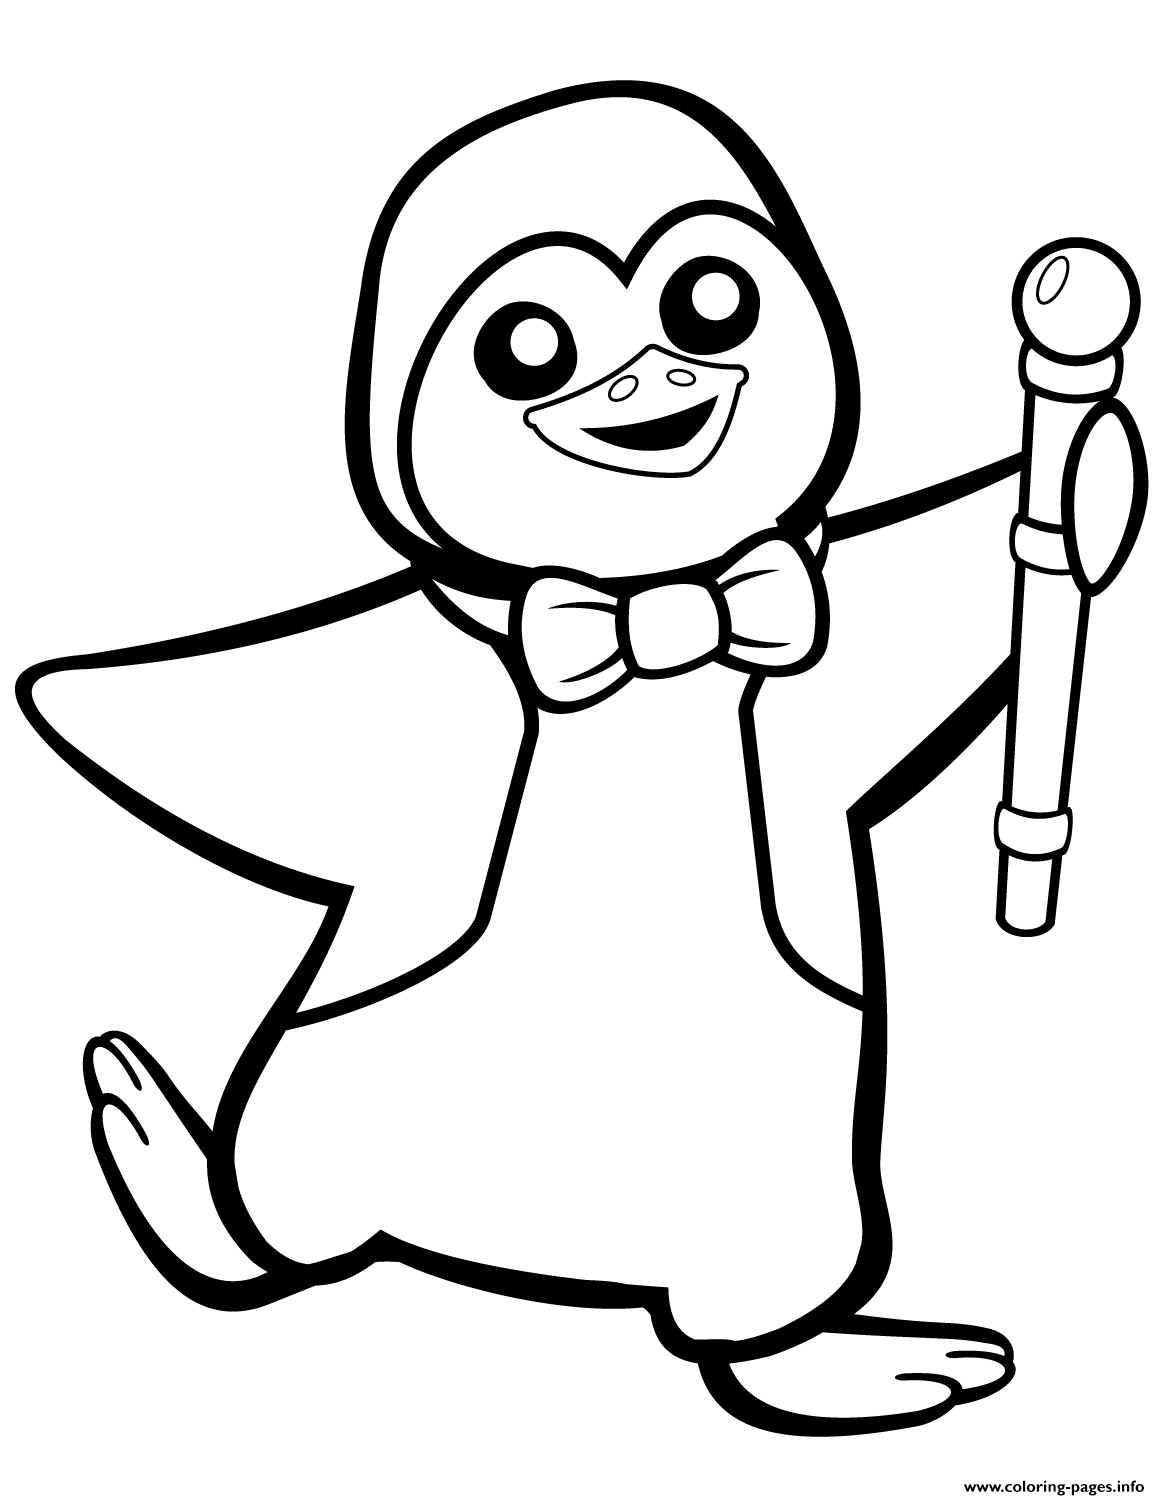 Funny Penguin With Bow Tie Coloring page Printable